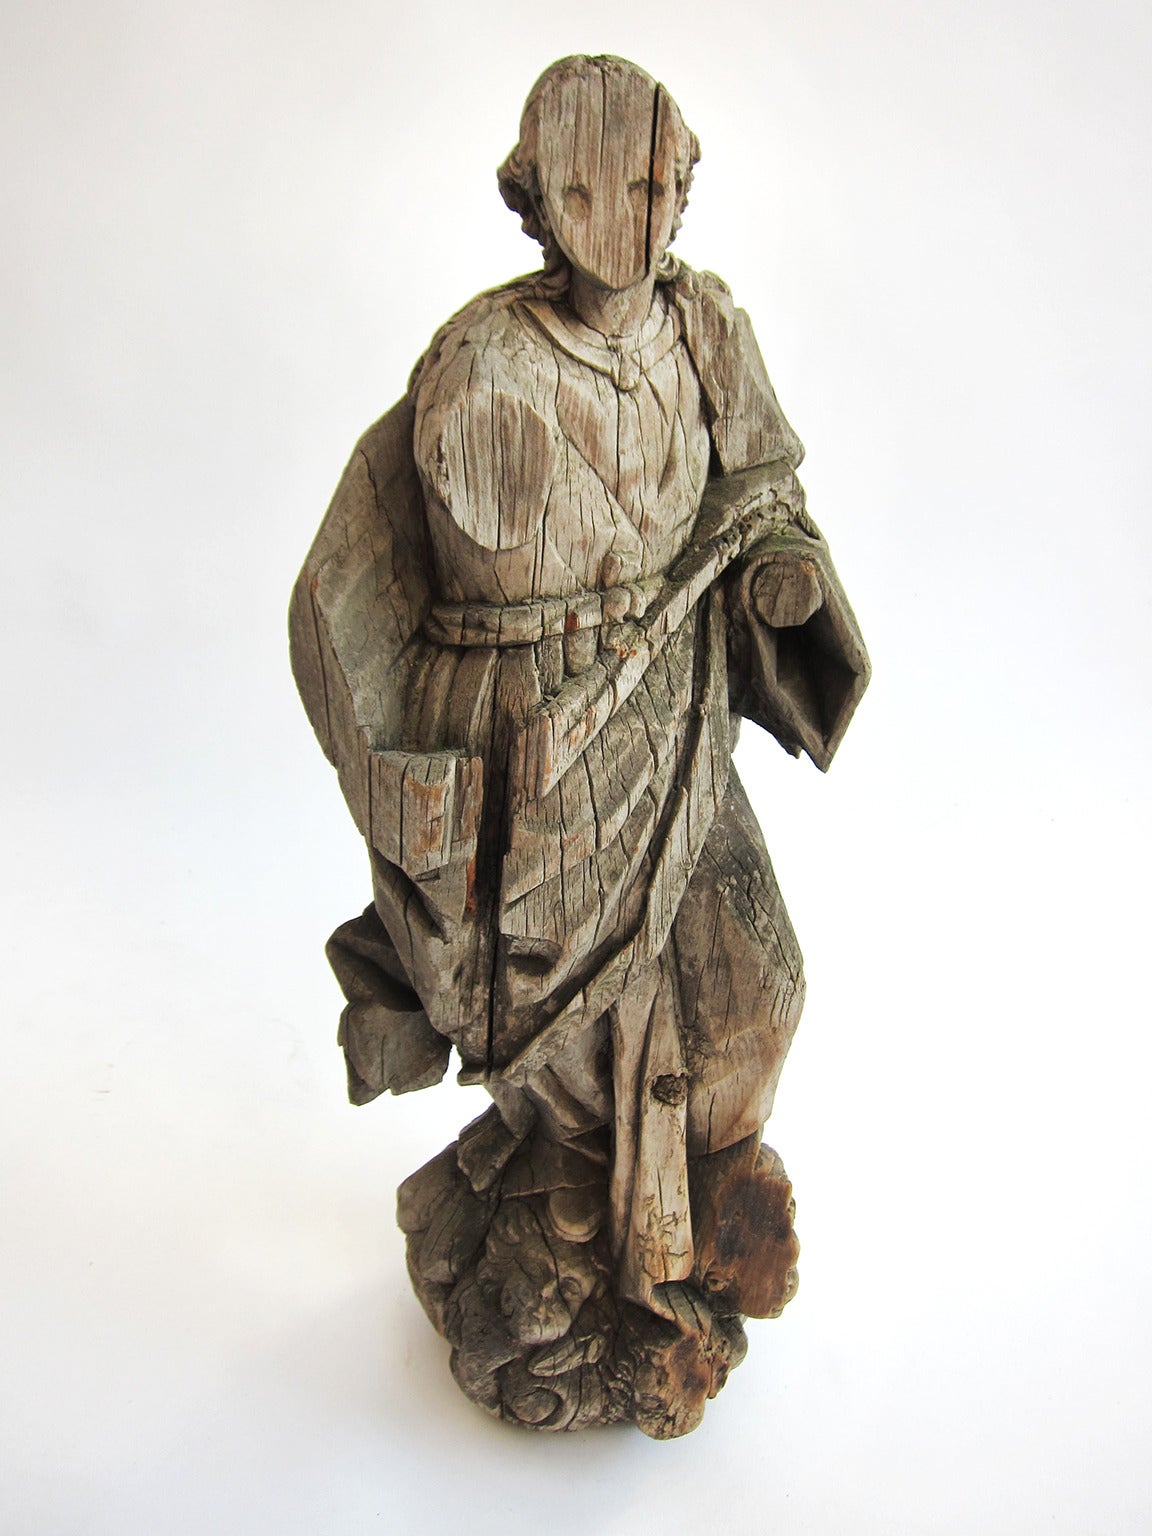 From the condition of this figure of the Virgen de la Immaculada Concepción it is apparent that it has been in the exterior for quite some time. Yet the weathering, the subsequent coloring, the loss of the hands and the wood segment which would have